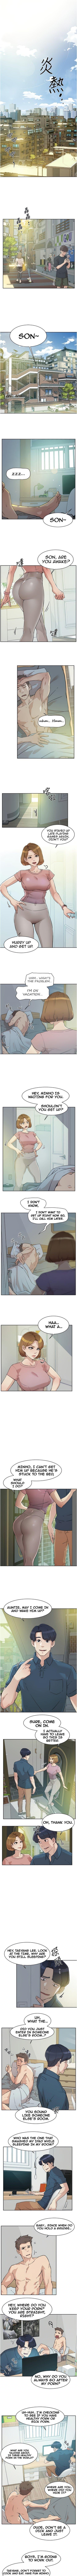 Shemale Everything about Best Friend Manhwa 01-13 Gaycum - Page 2